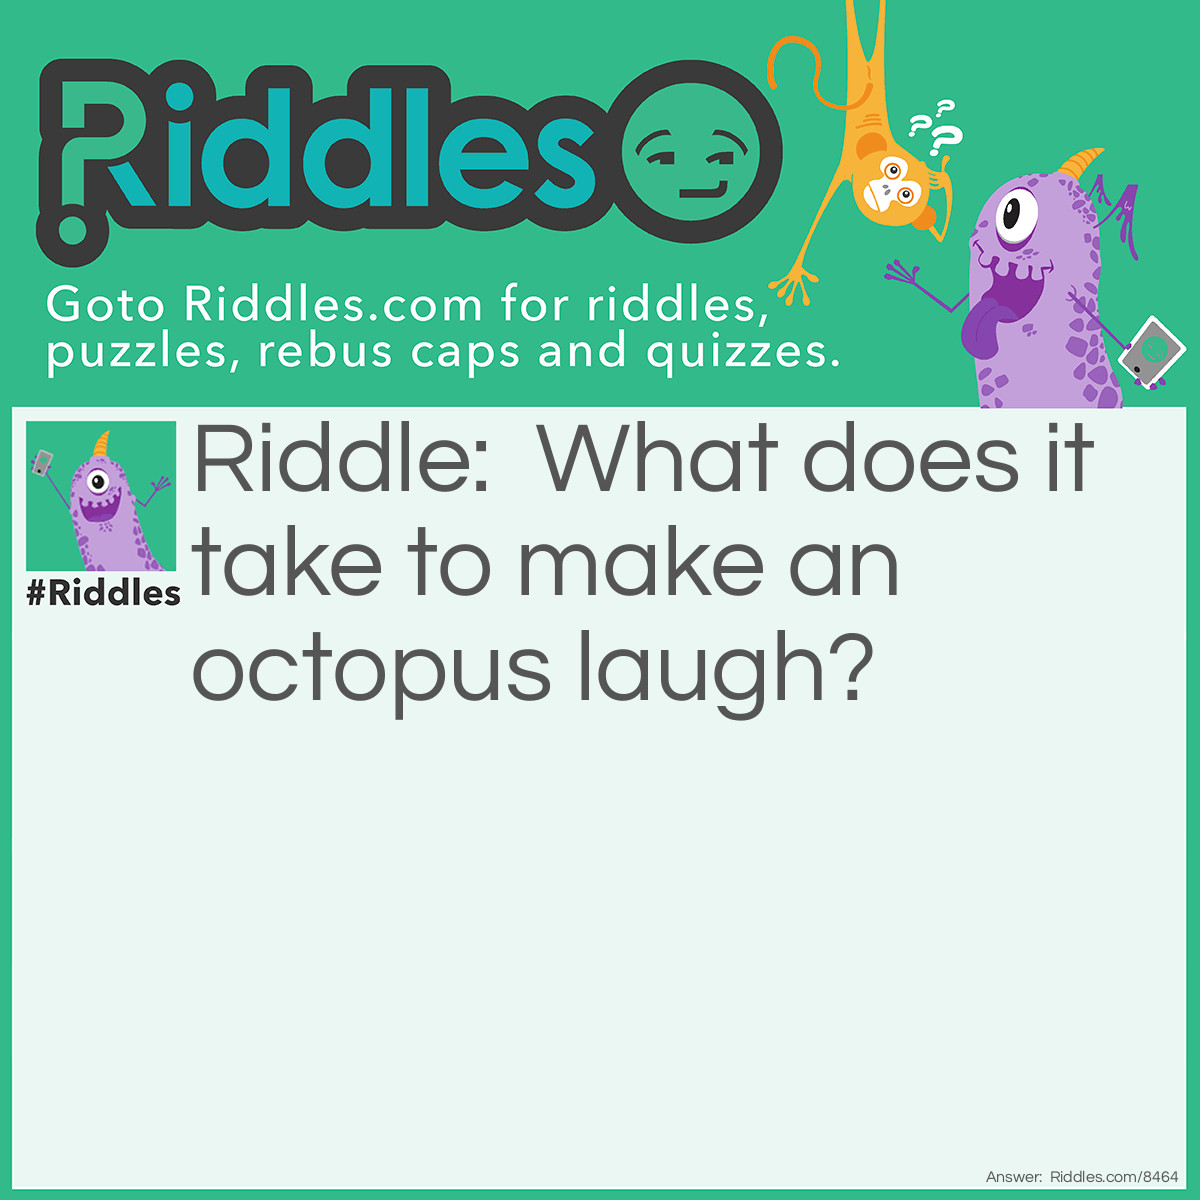 Riddle: What does it take to make an octopus <a title="laugh" href="/funny-riddles">laugh</a>? Answer: Ten-tickles (tentacles).